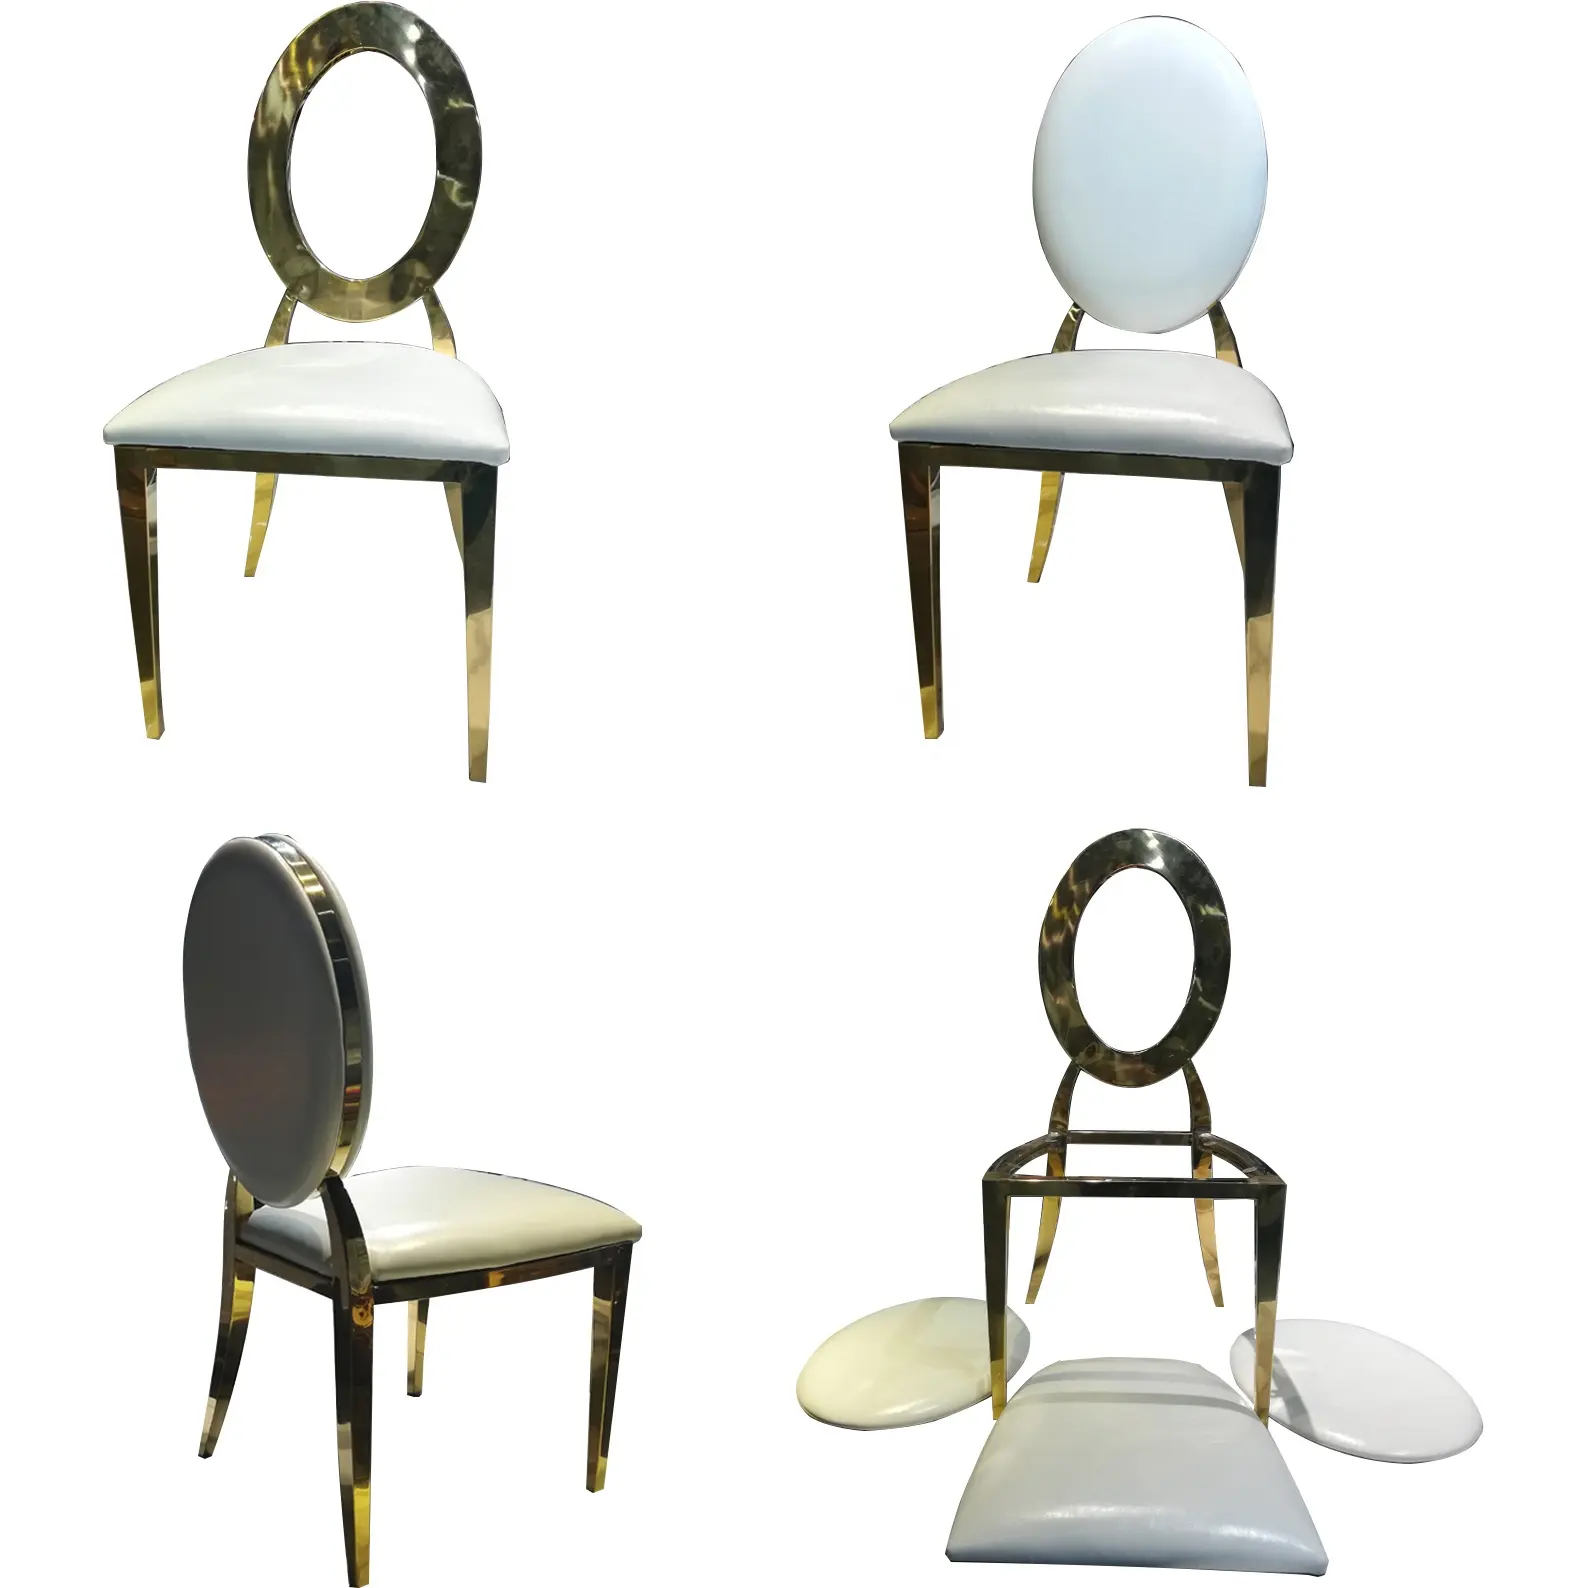 Stainless steel gold stackable luxury louis events hotel banquet wedding chairs for decor hall restaurant reception